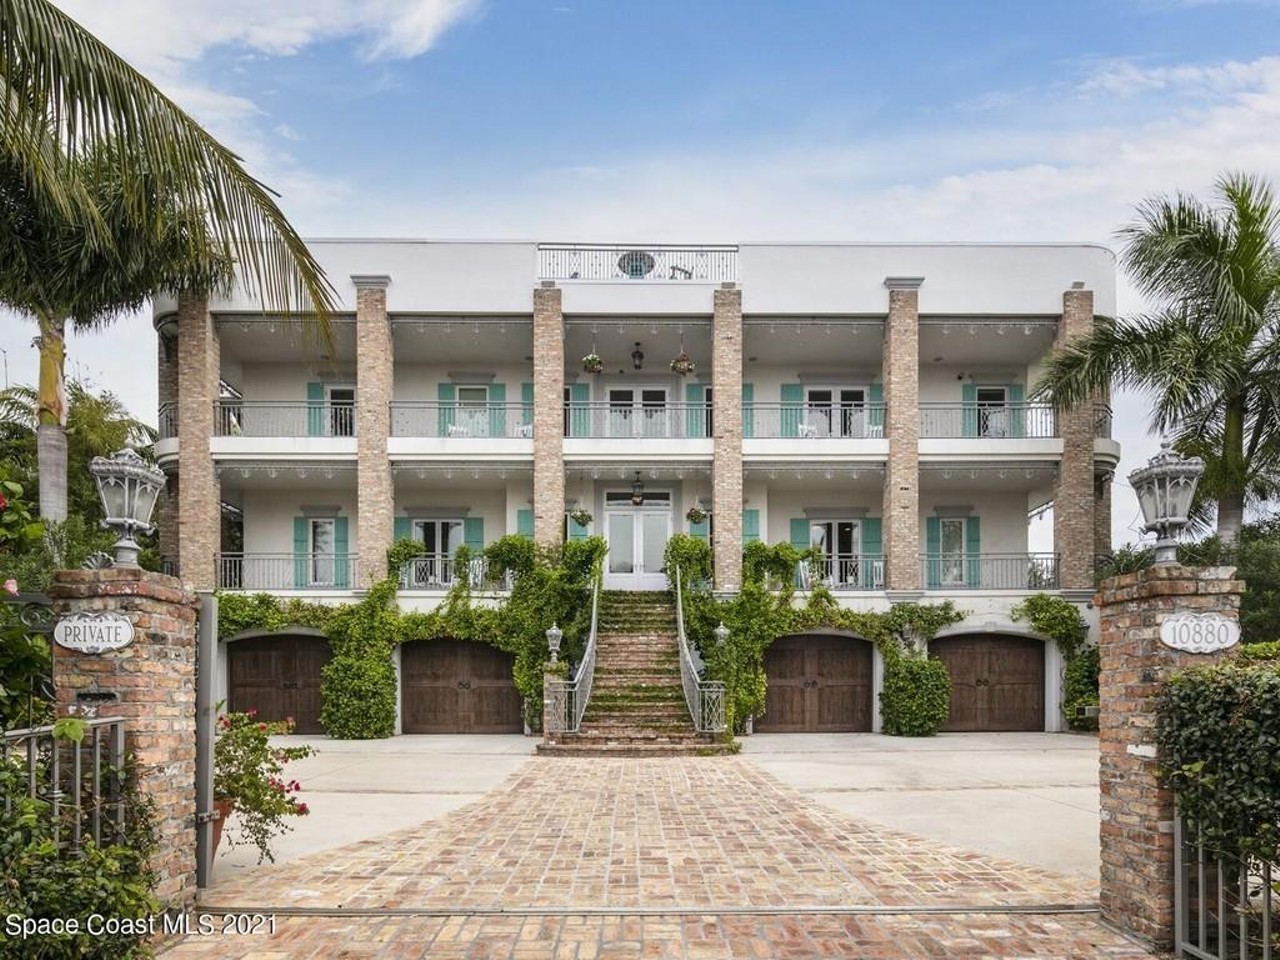 This $5 million Merritt Island home is a mishmosh of French Quarter architecture and Florida opulence